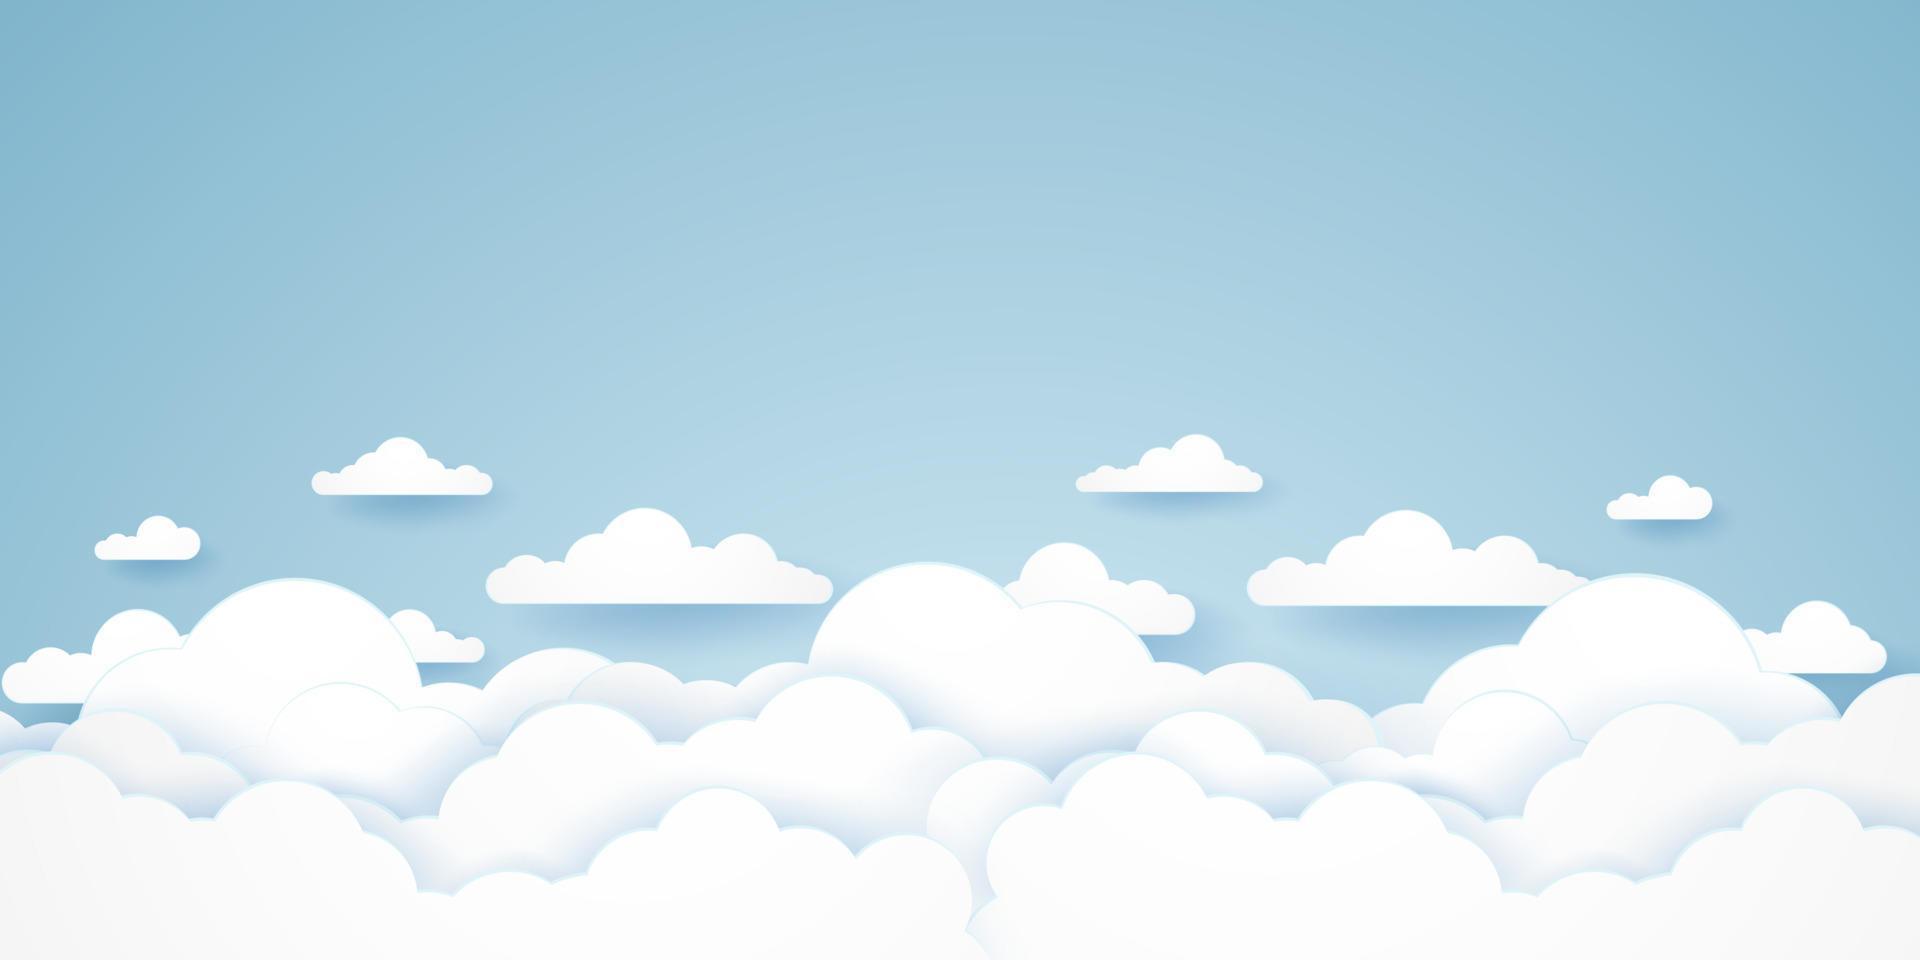 Cloudscape, blue sky with clouds, paper art style vector